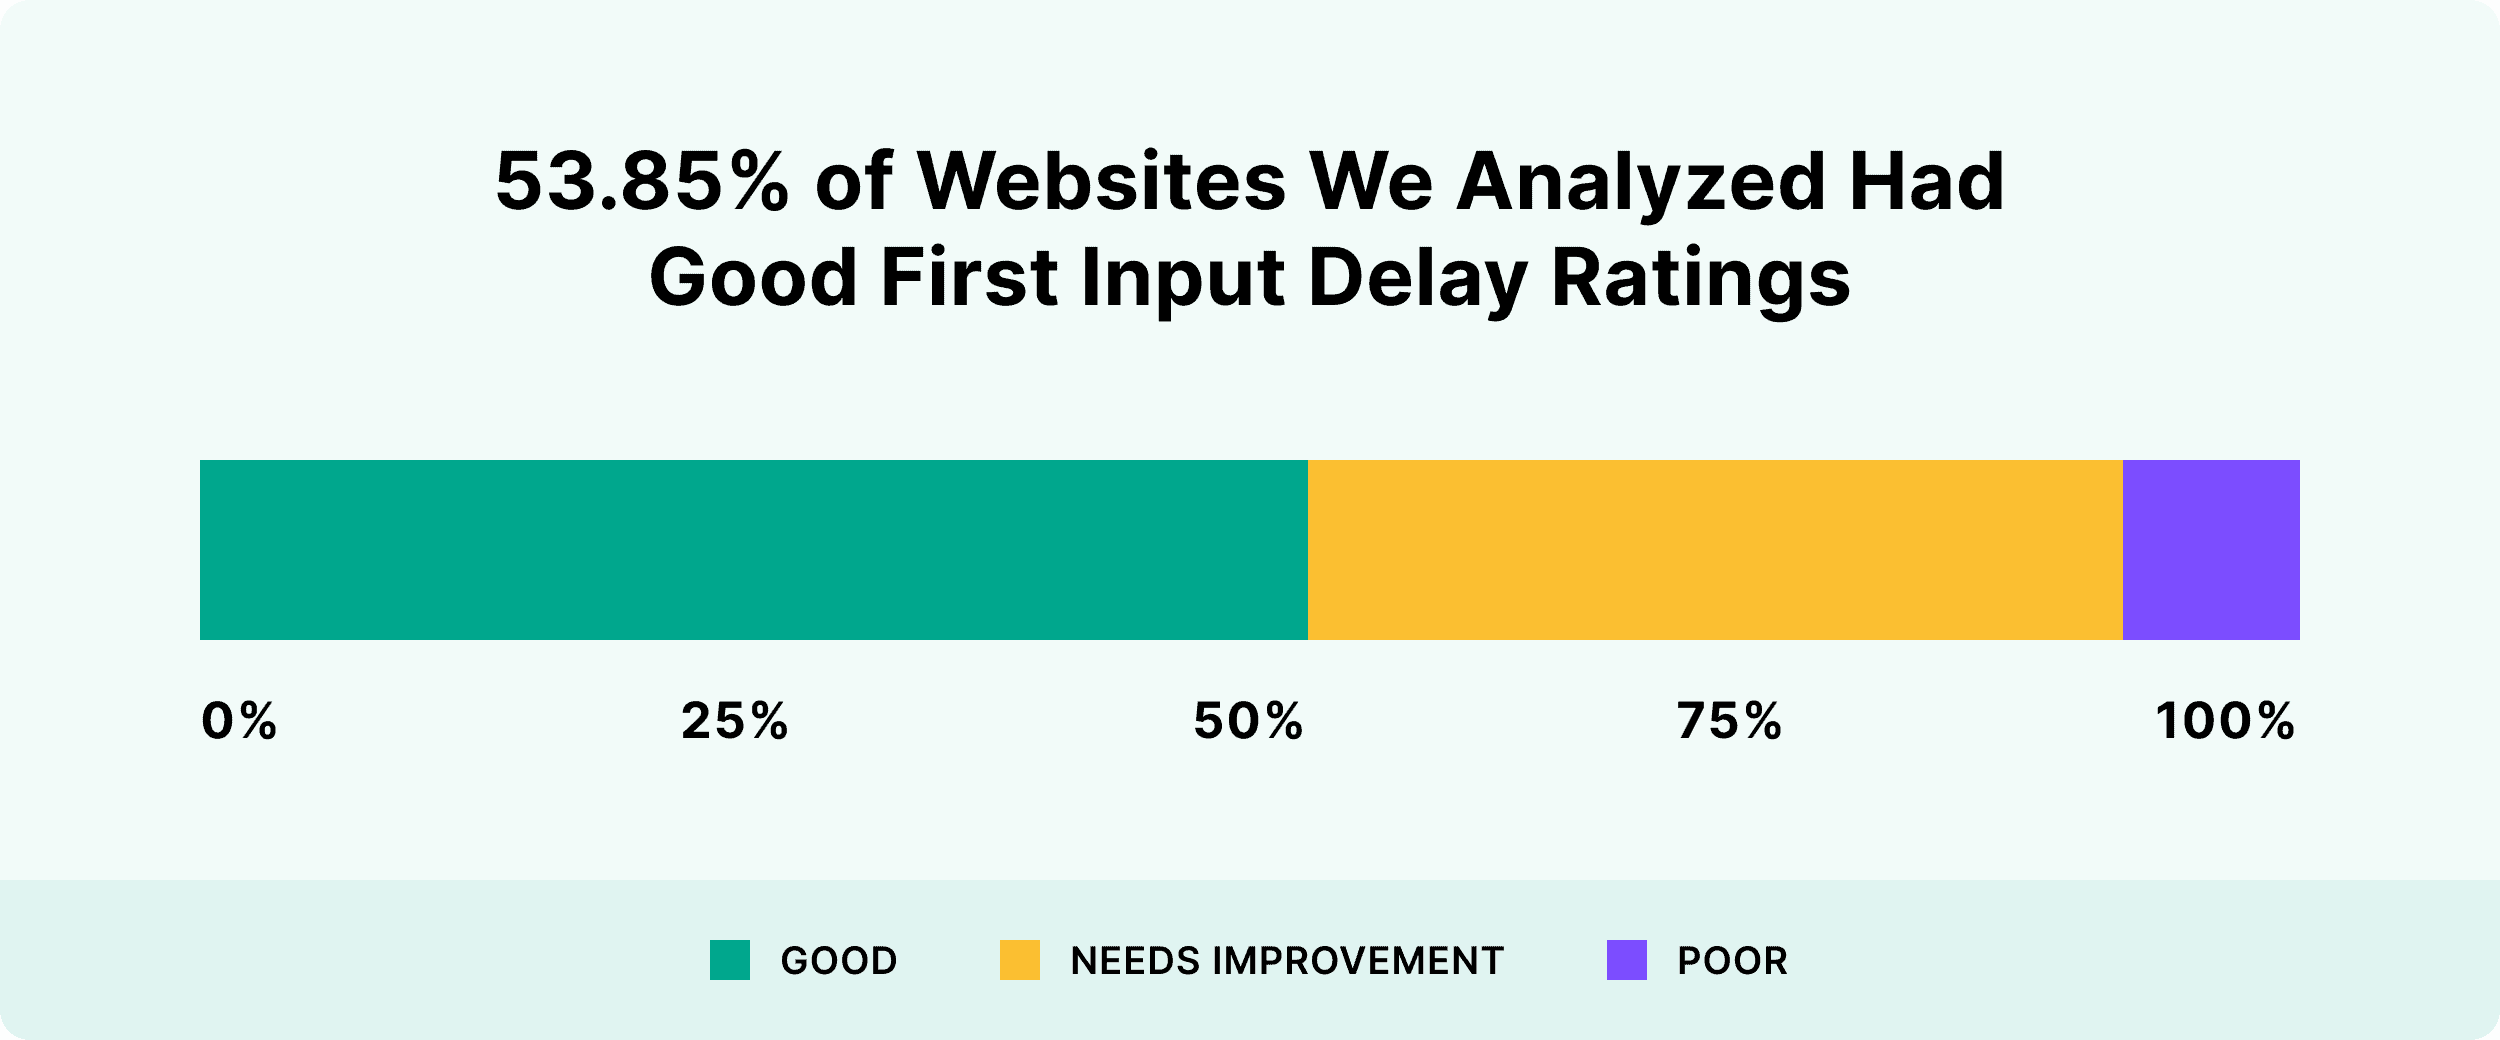 53.85% of websites we analyzed had good first input delay ratings